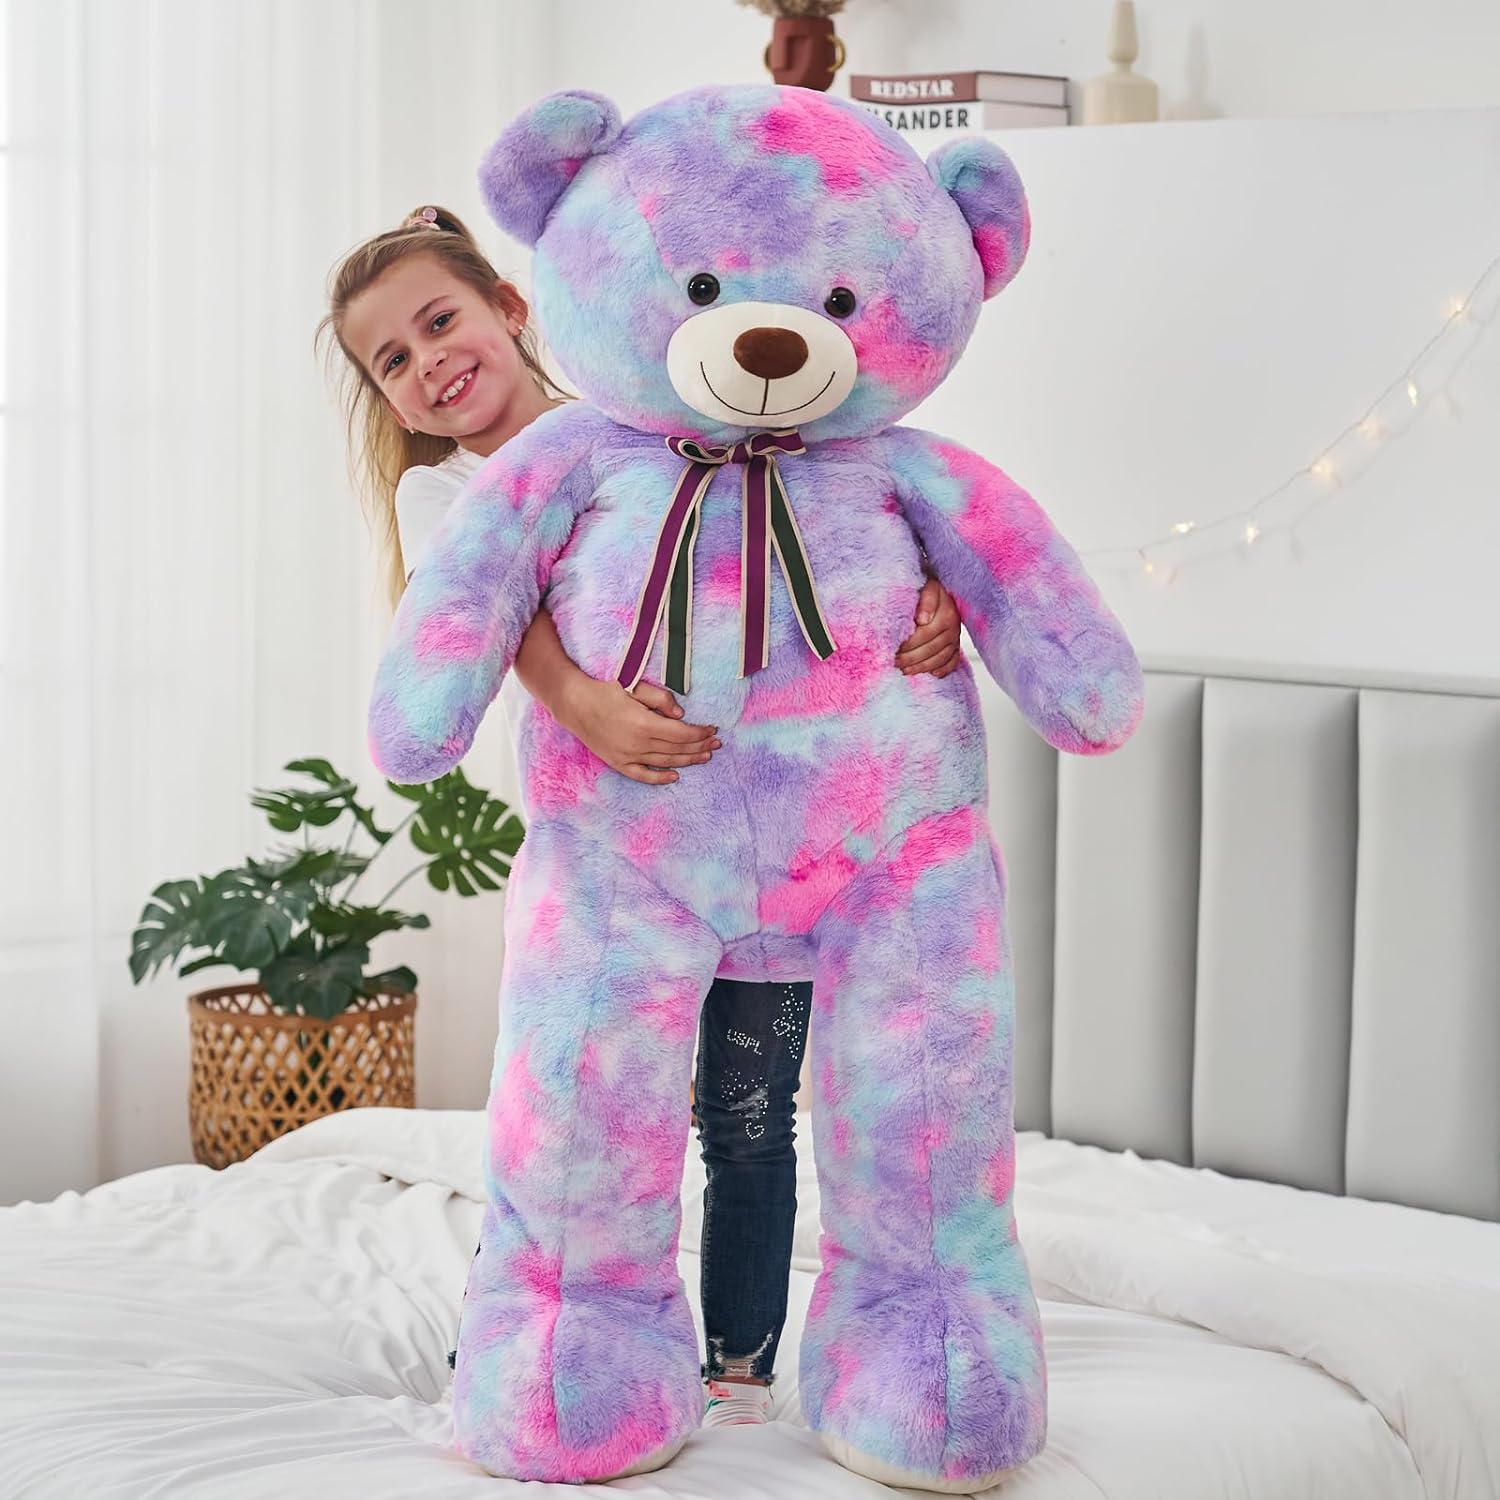 Giant Teddy Bear Plush Toy, Multicolor, 52 Inches